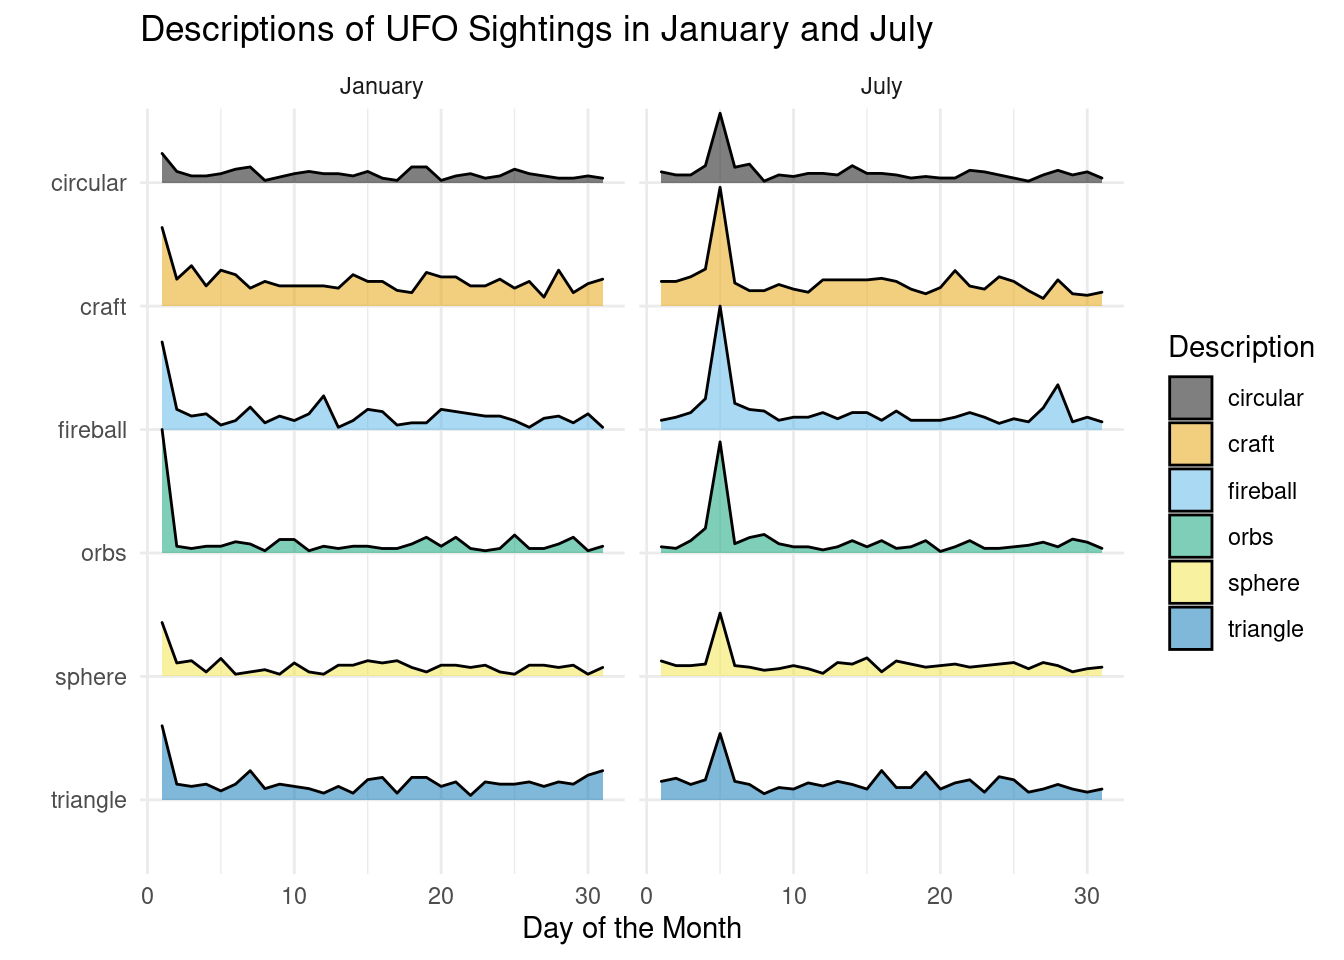 This is a ridgeline plot titled Descriptions of UFO Sightings in January and July which displays the word usage of circular, craft, fireball, orbs, sphere, and triangle for each day of the month and is faceted between January and July. The January plot has a peak at the very beginning for all words indicating high reporting on January 1st. Other than this day, the ridgelines are relatively flat with no noticeable trends. The July plot has a peak near the beginning for all words indicating high reporting on July 5th. Similarly to the January plot, the ridgelines are very flat on all other days with the exception of fireball having a noticeable  peak near the end of the plot.